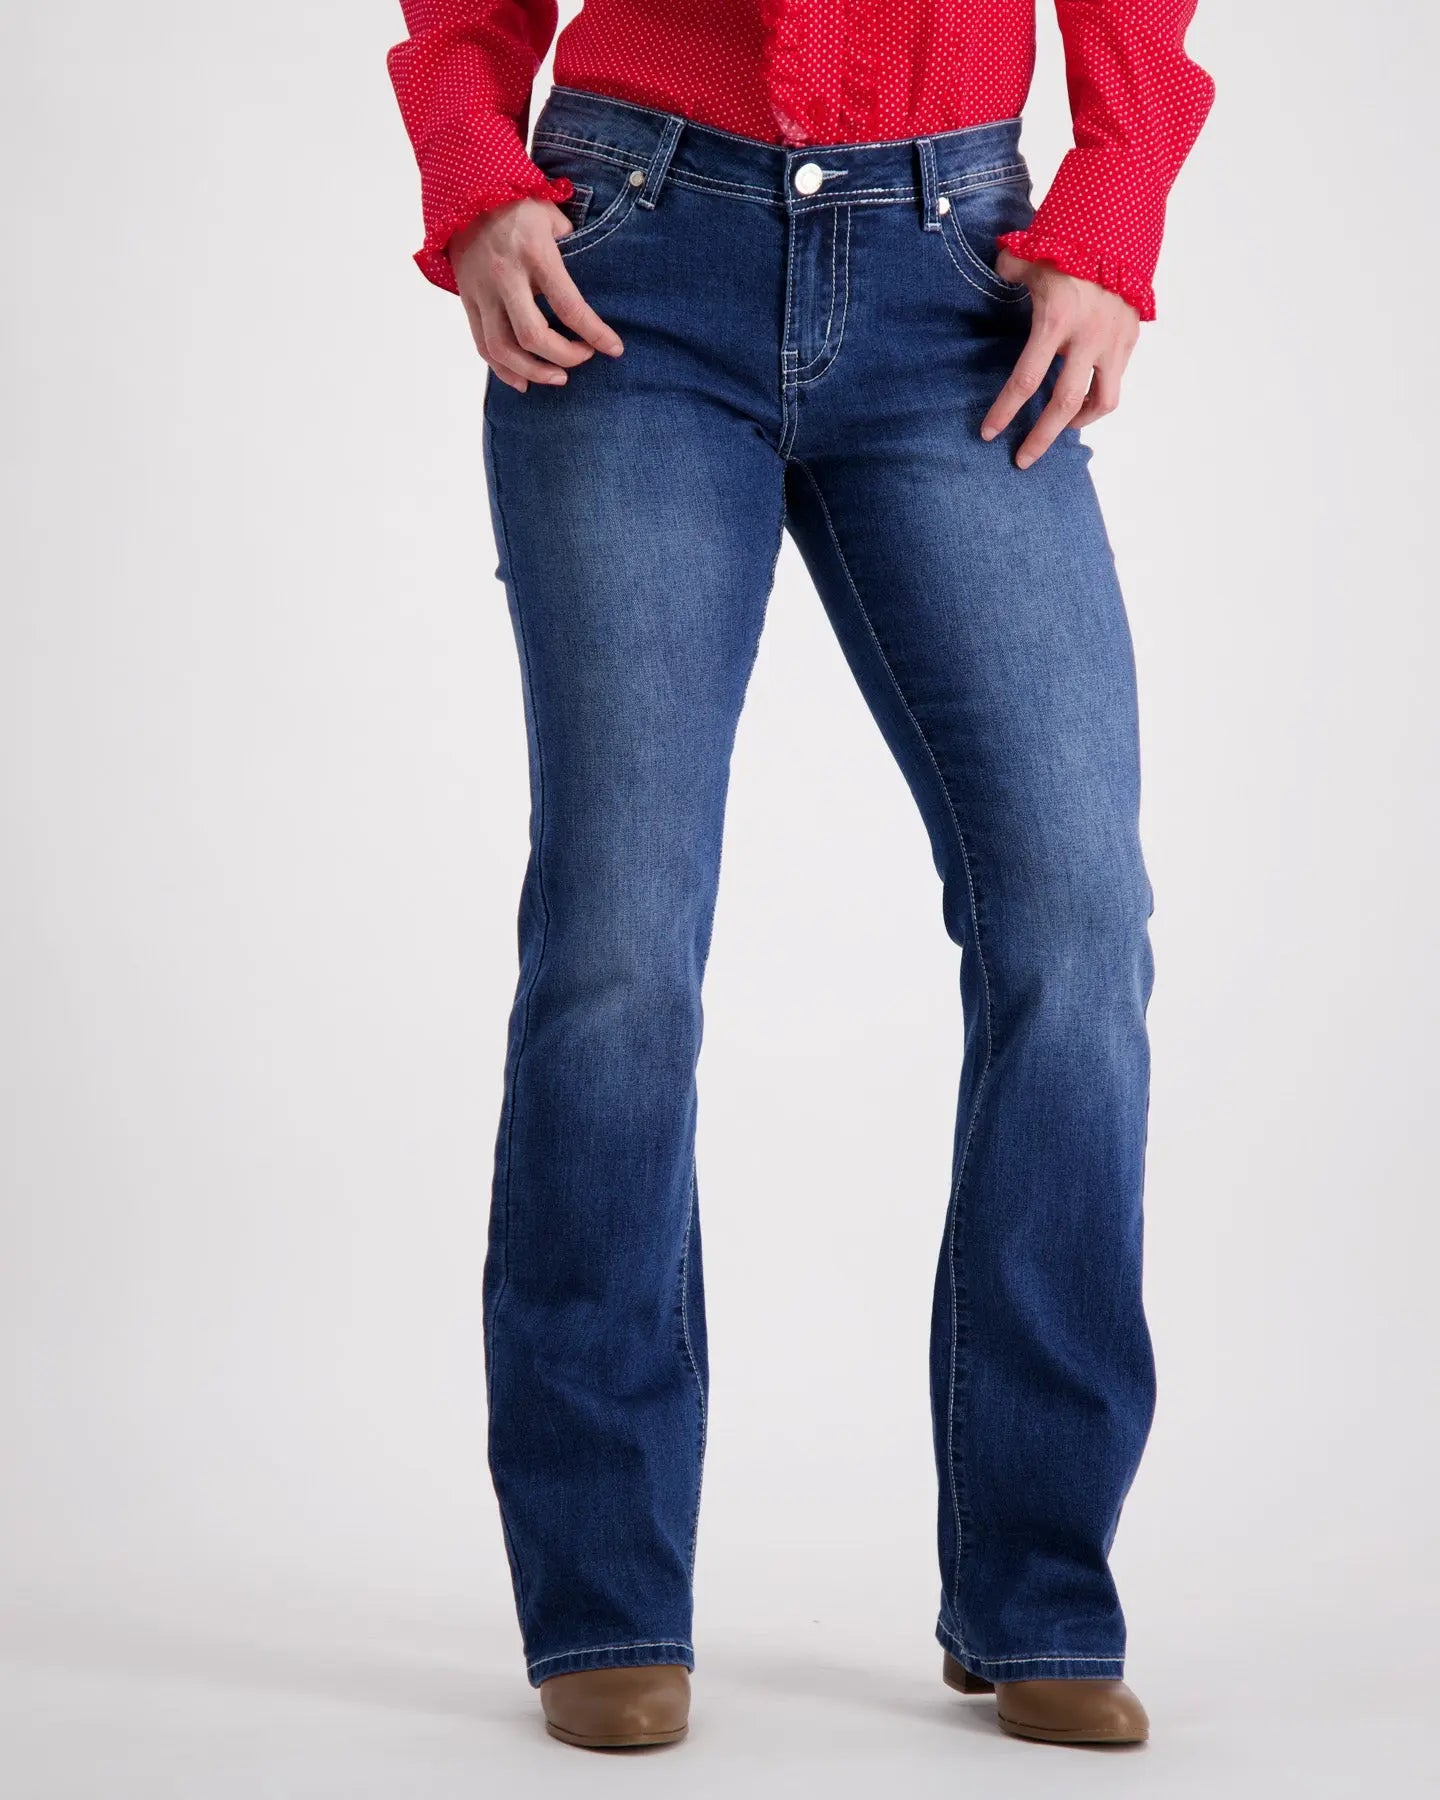 Riding Jeans, Cheyenne Boot-Cut Riding Jeans